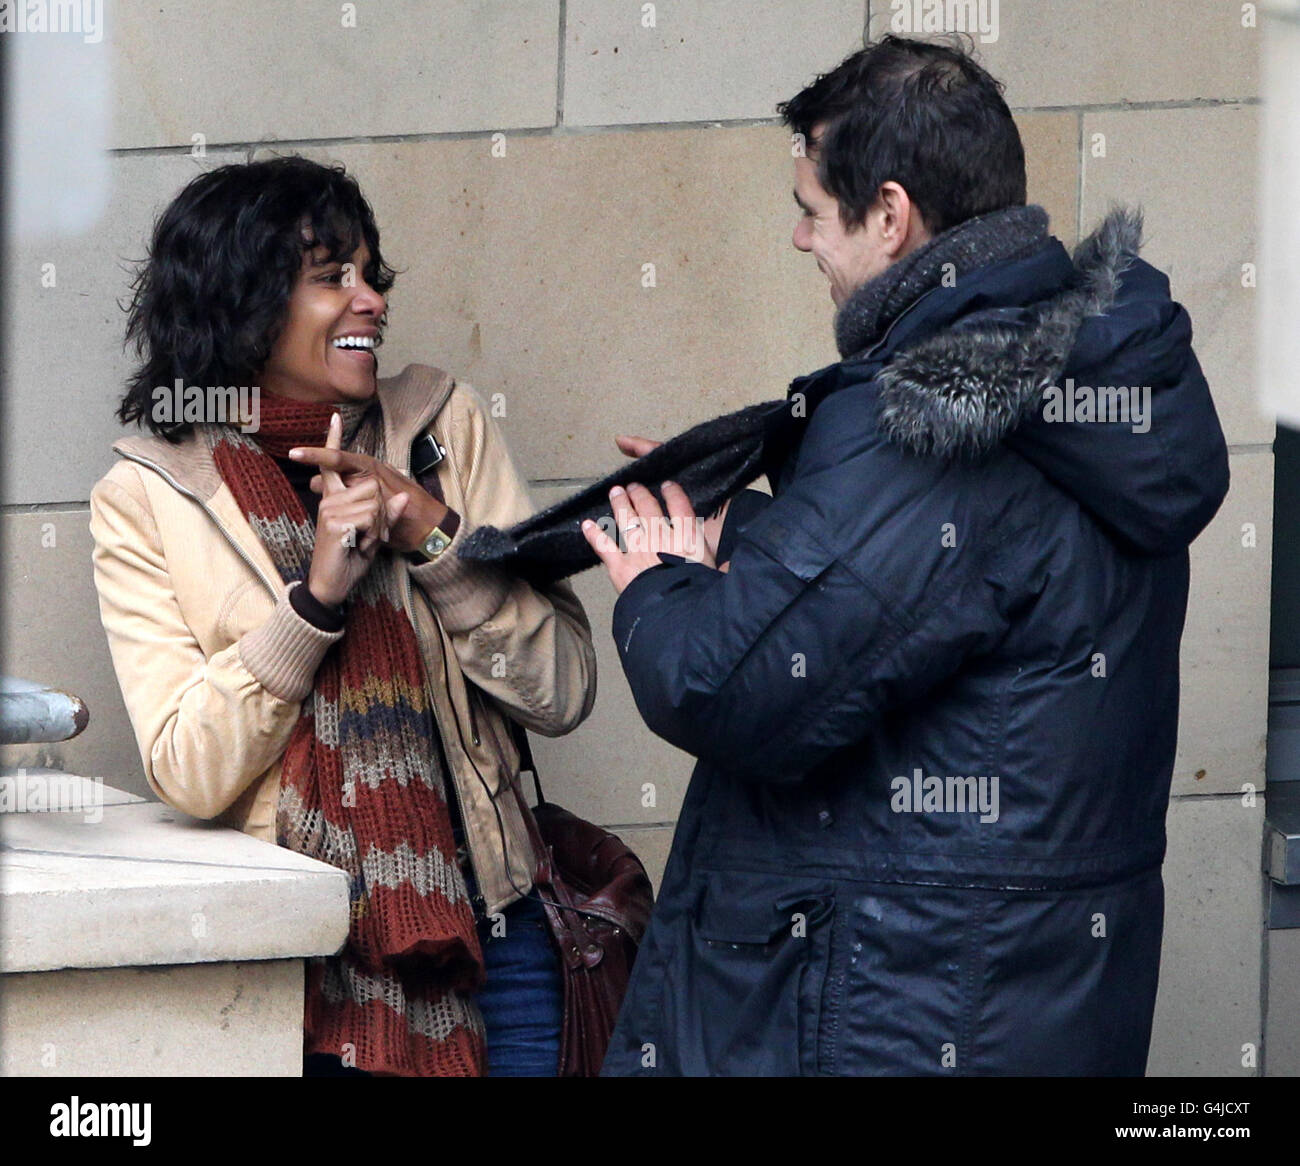 Halle Berry on the set of her new film Cloud Atlas which is currently being filmed in Glasgow in between takes with director Tom Tykwer . The film also stars Tom Hanks. Stock Photo